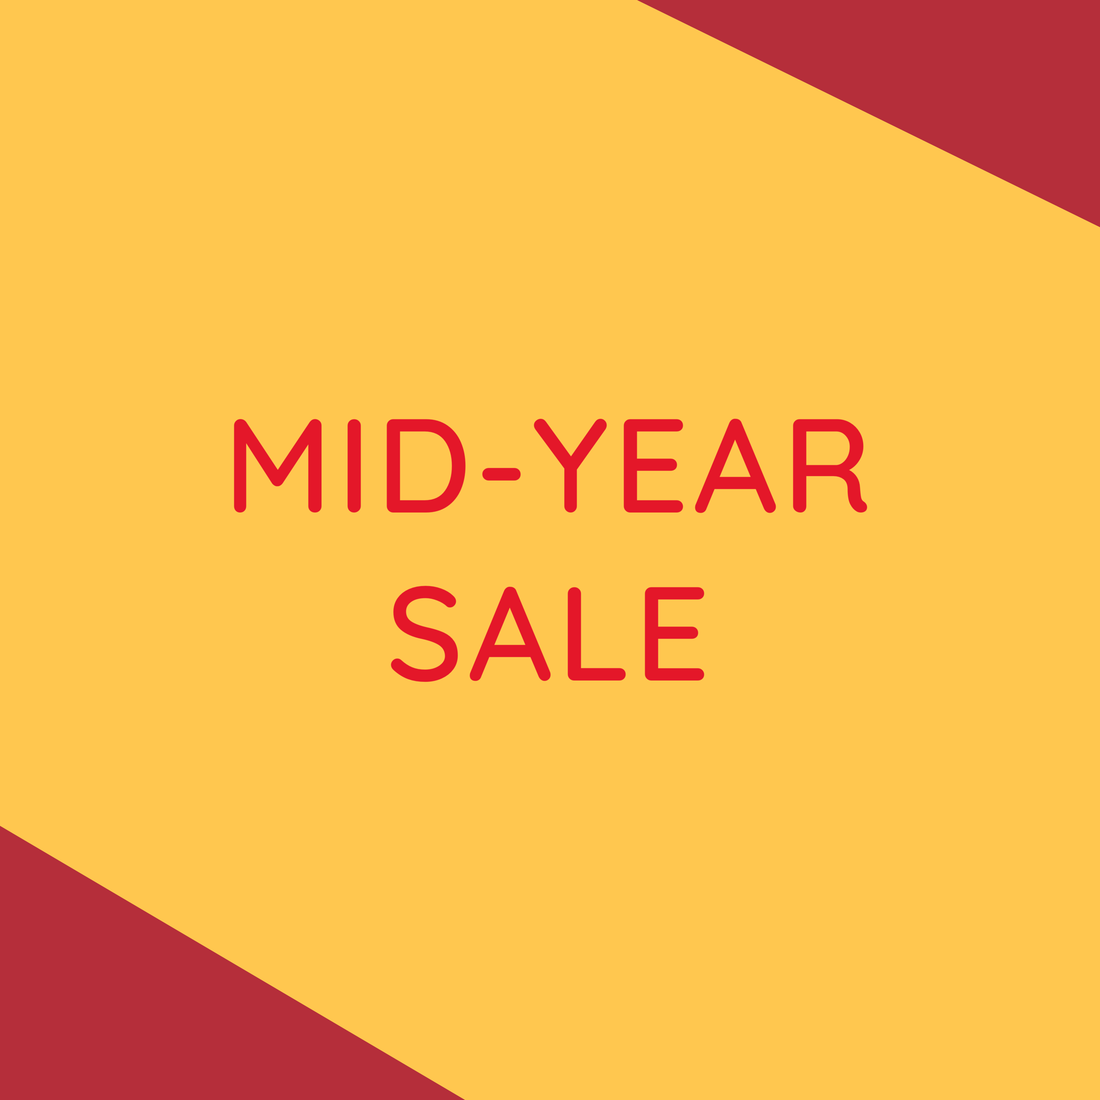 Our 2019 Mid Year Sale!